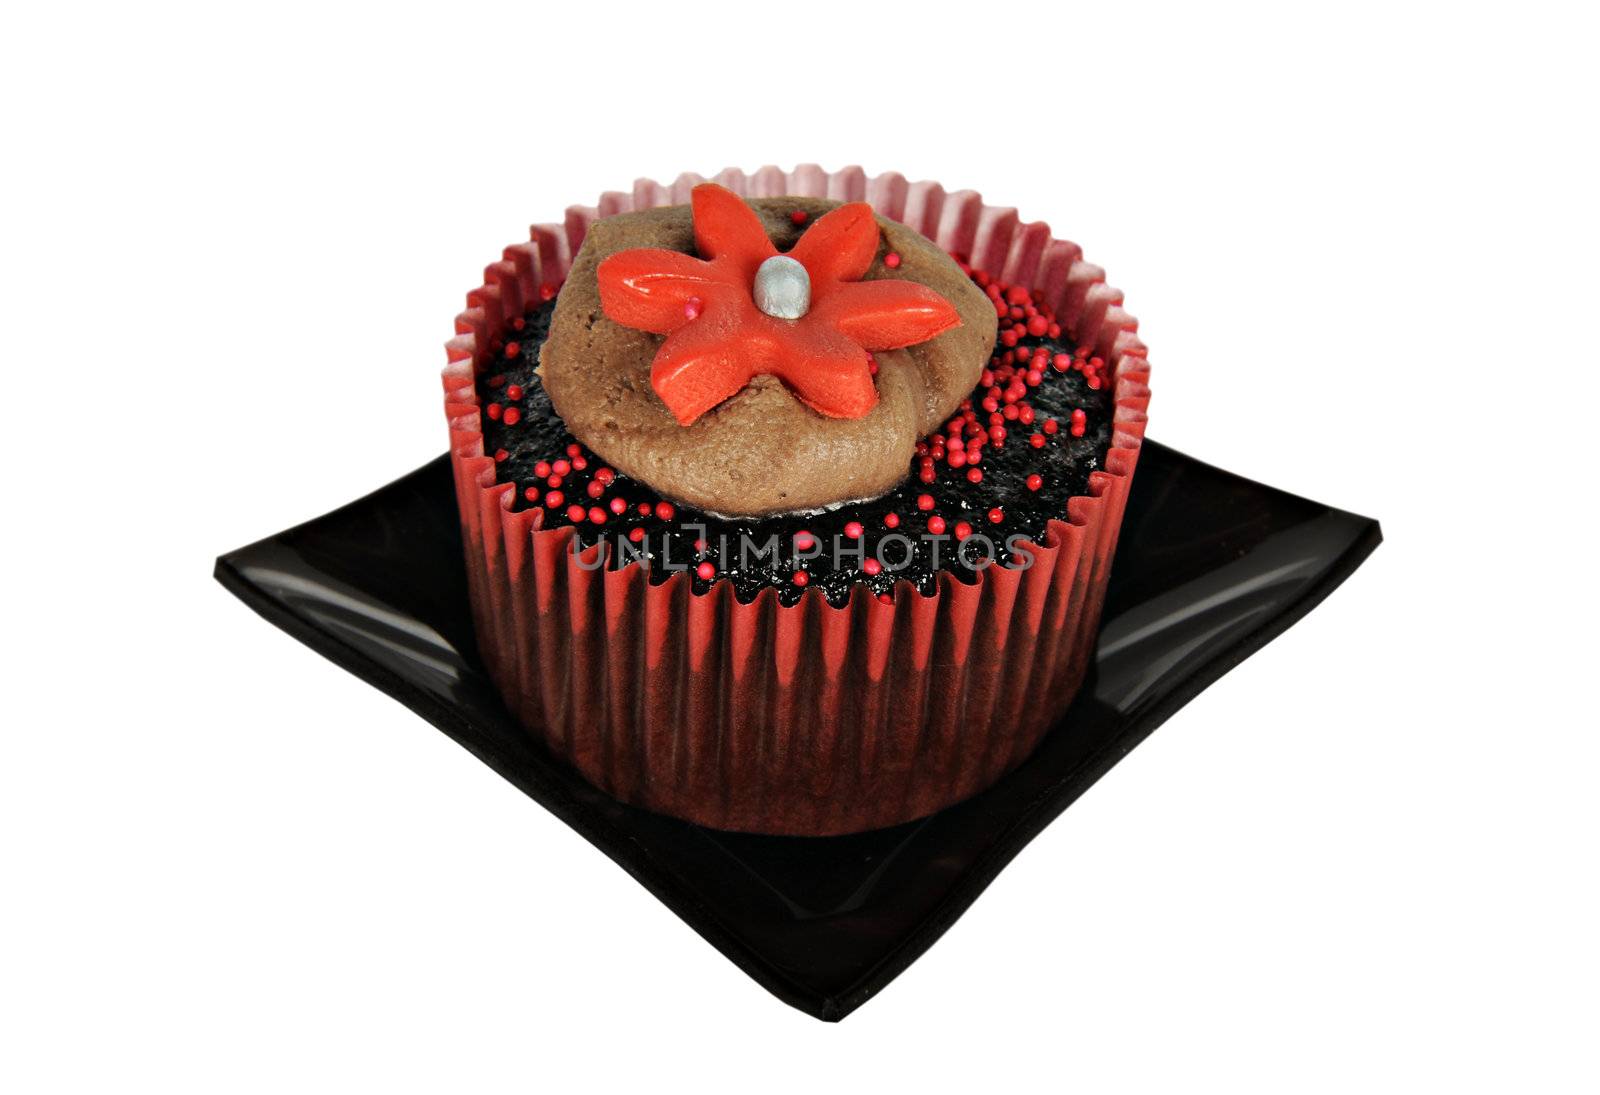 One chocolate cupcake with red icing by tish1